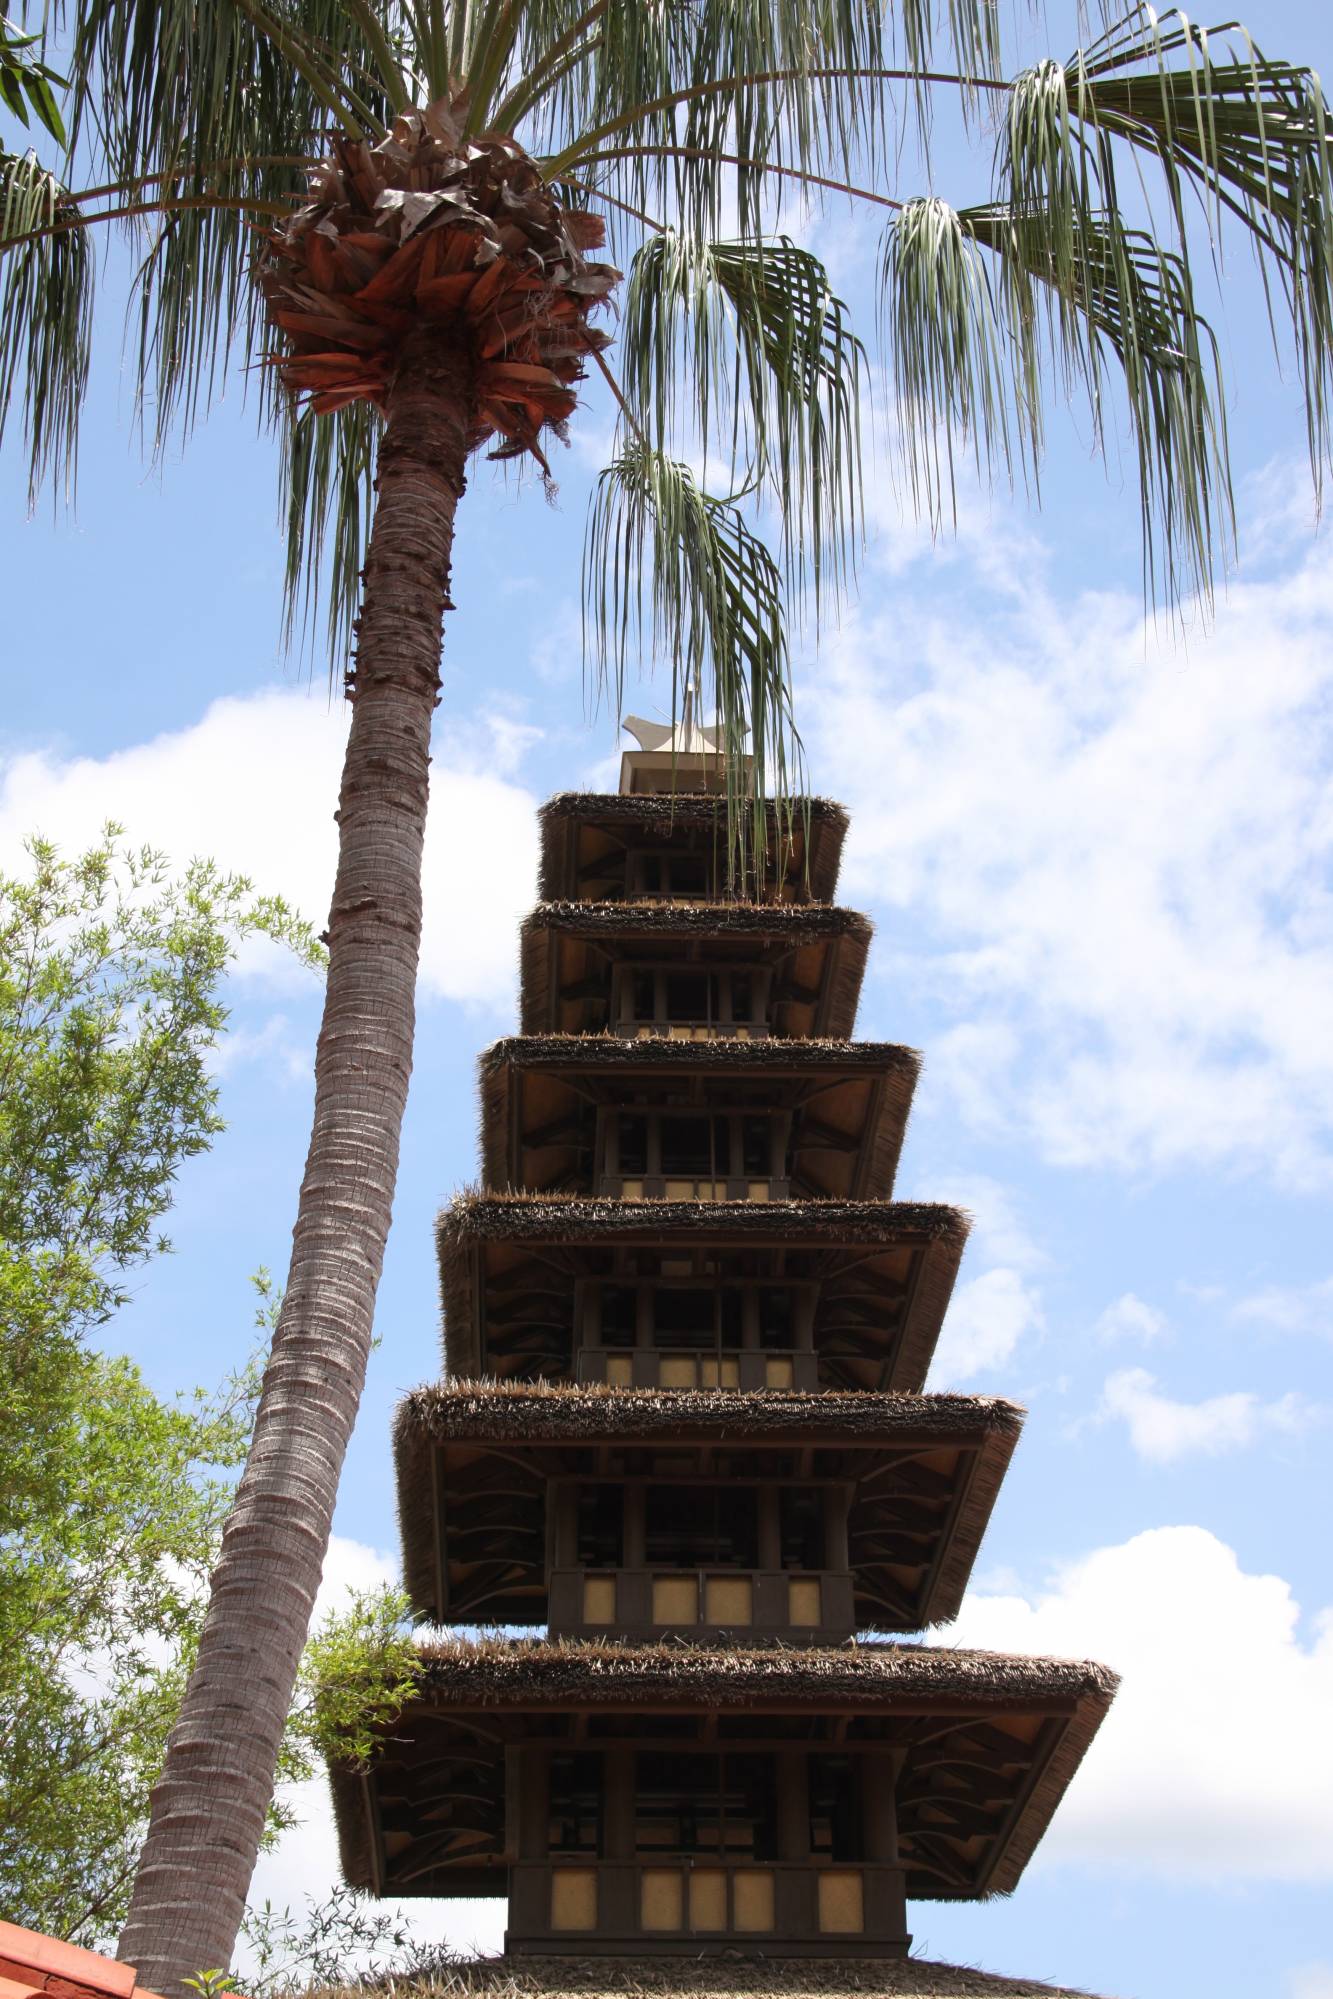 Outside of the Tiki Room